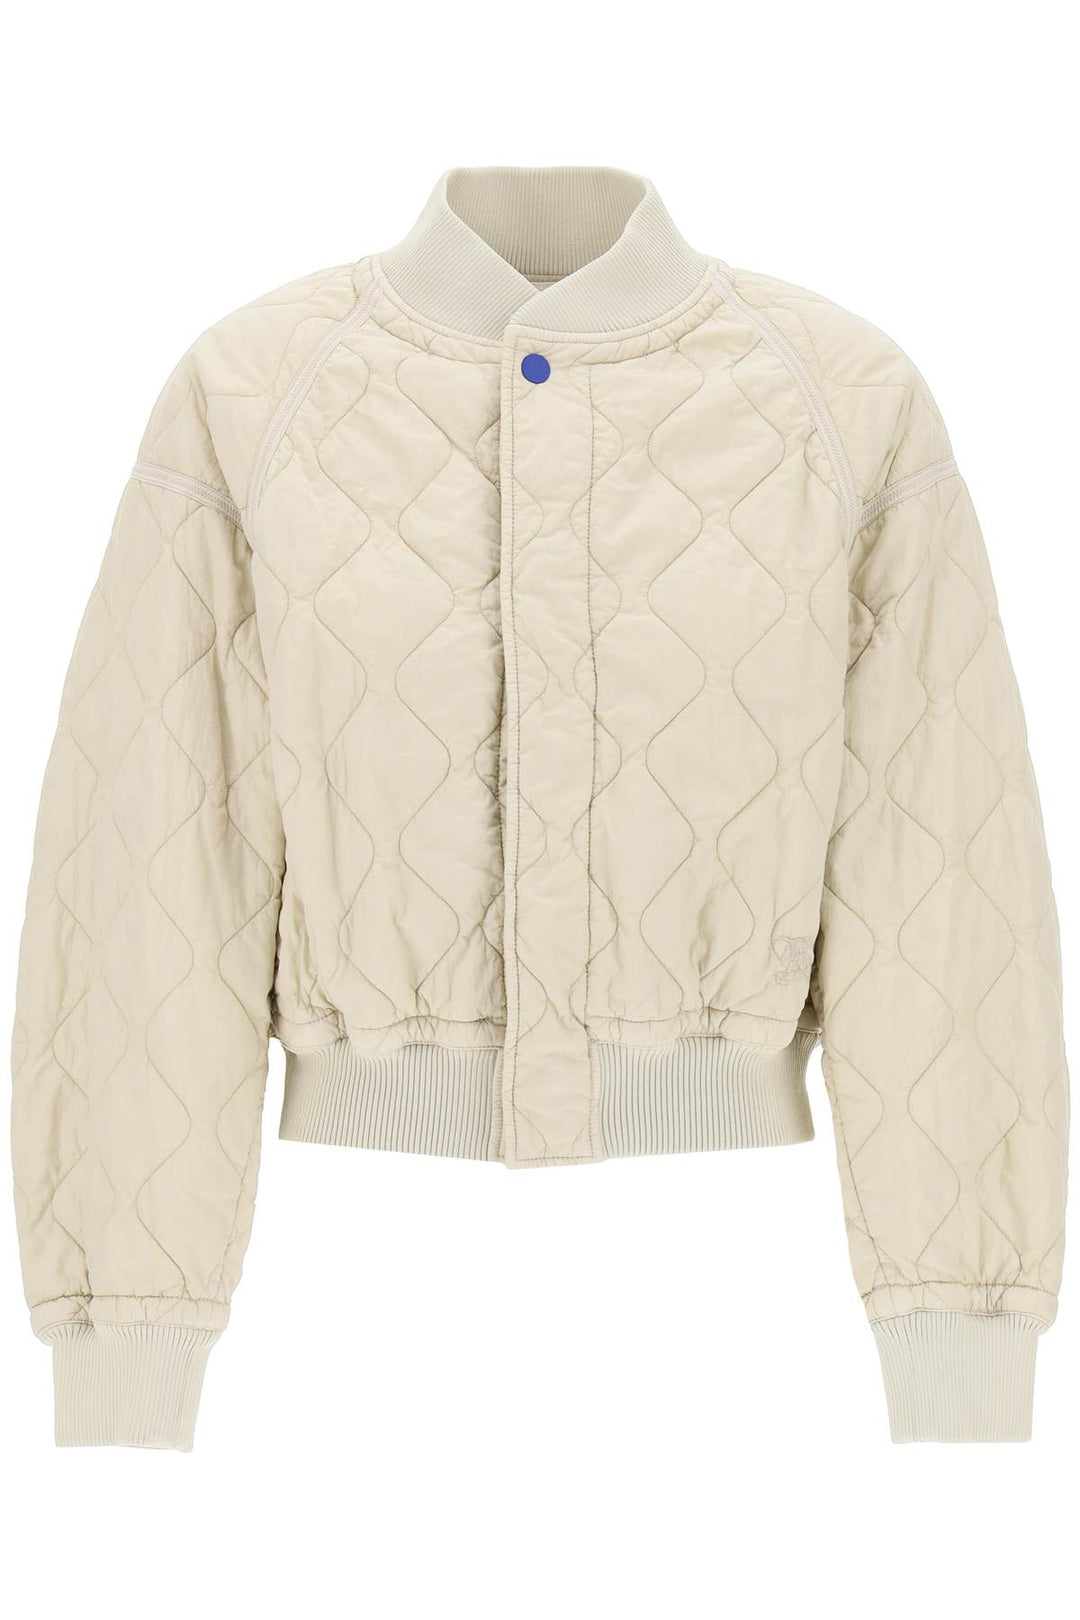 Burberry Quilted Bomber Jacket   Neutro